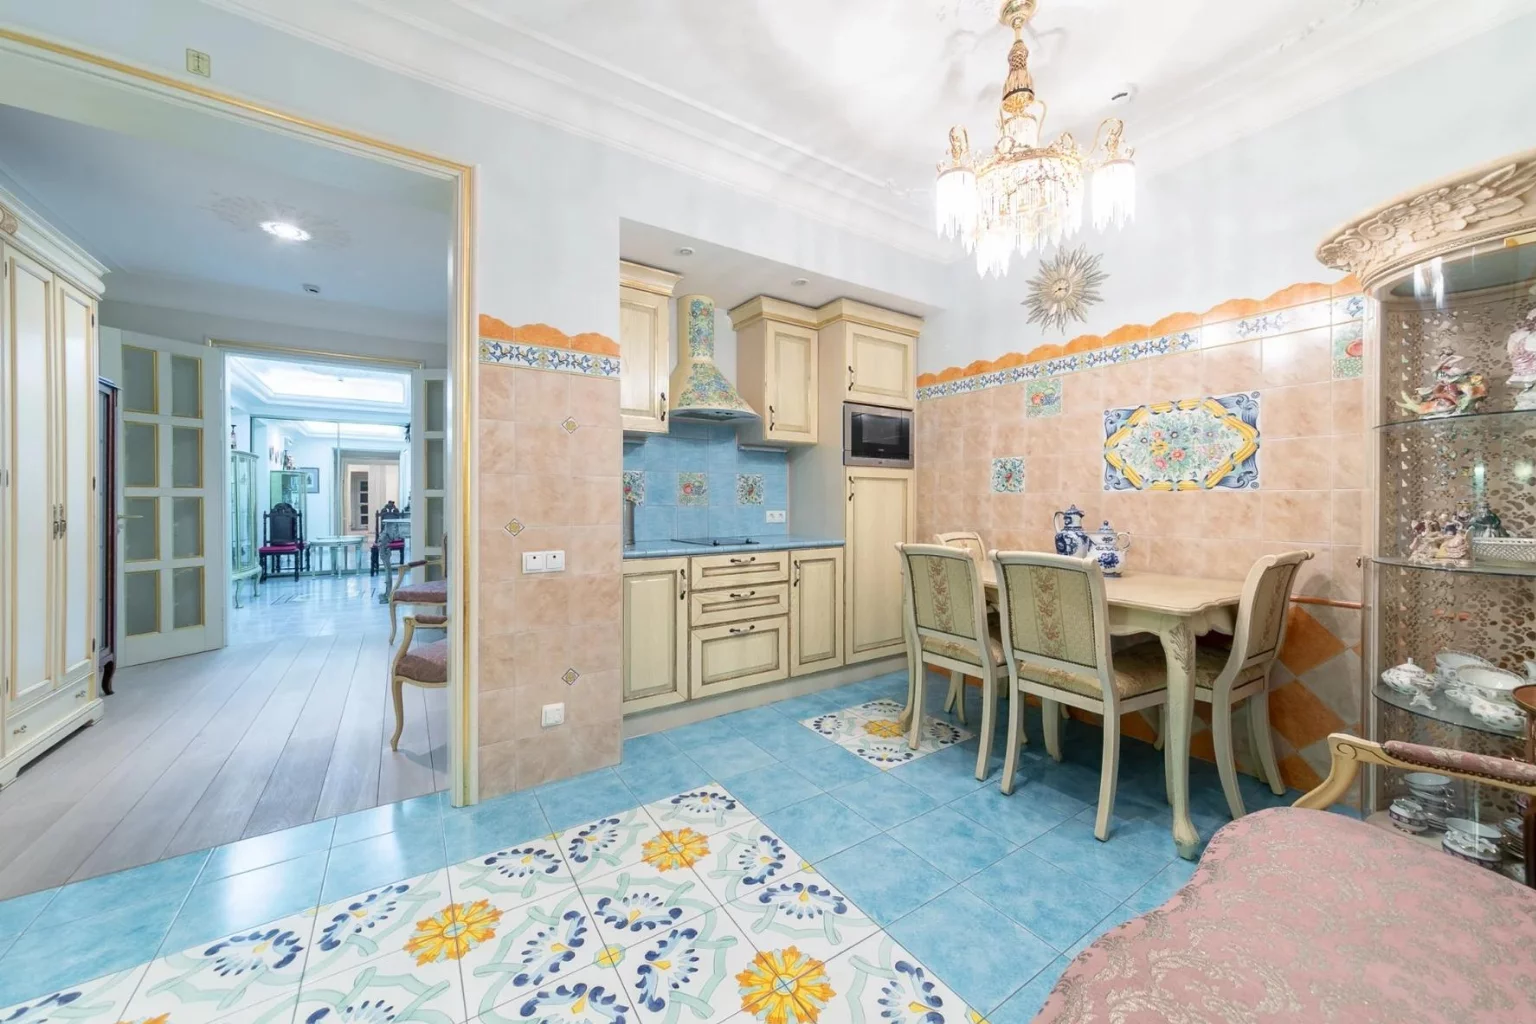 a kitchen in the bright colours of a flat in St. Petersburg